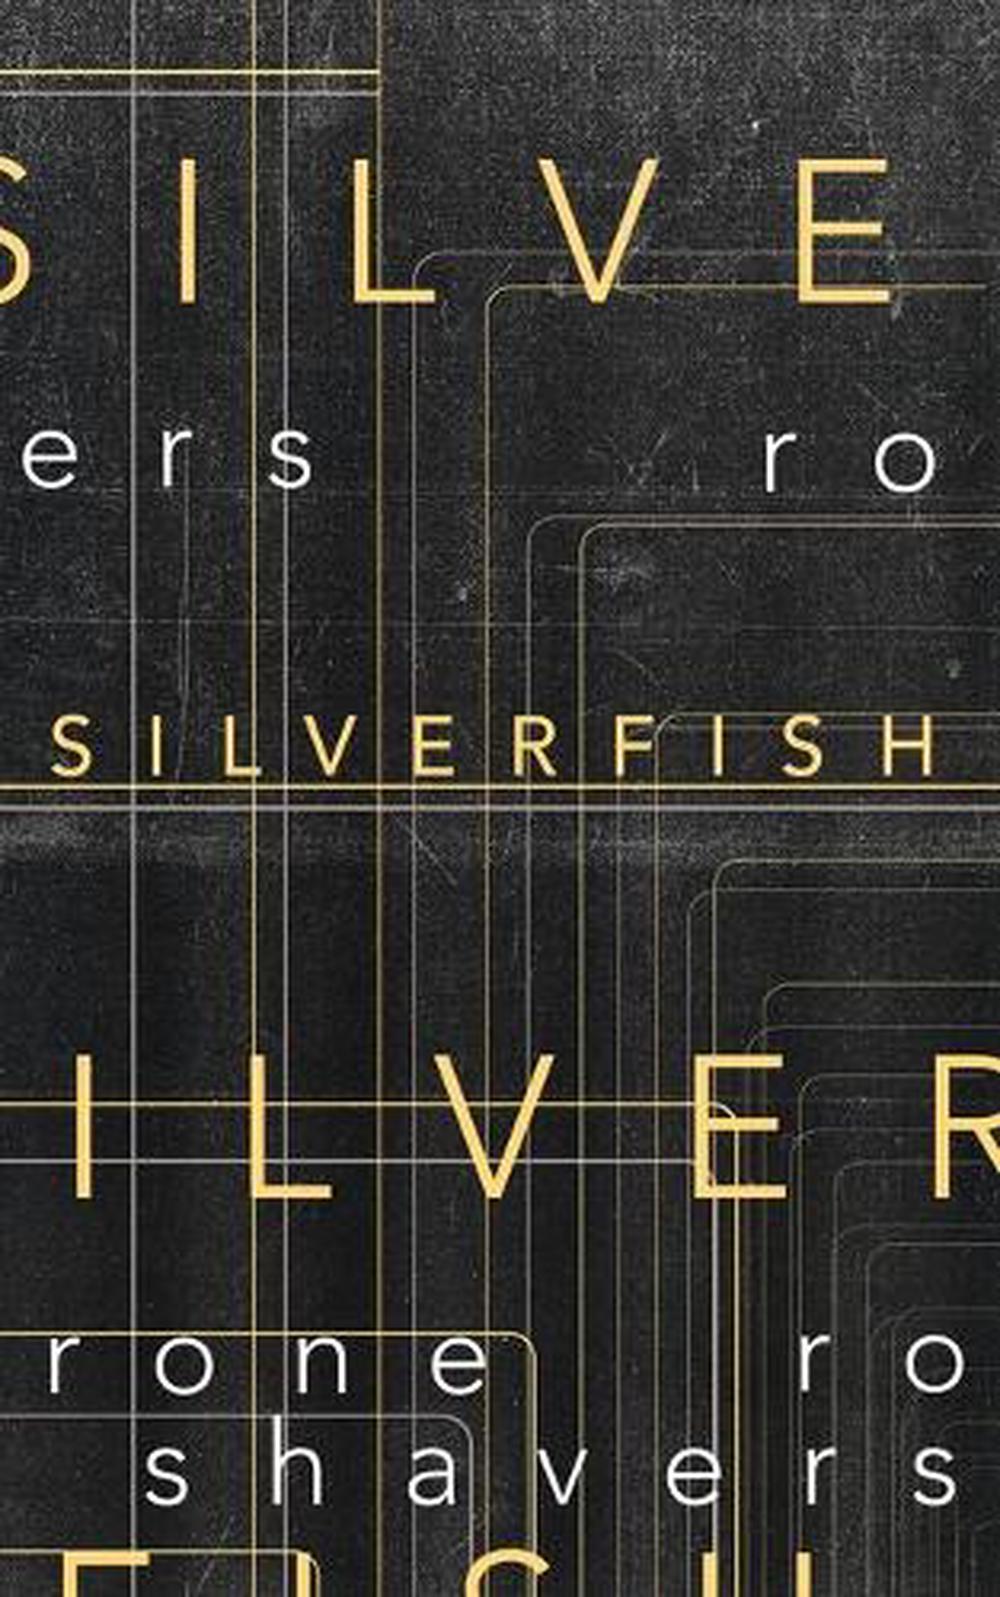 rone shavers silverfish